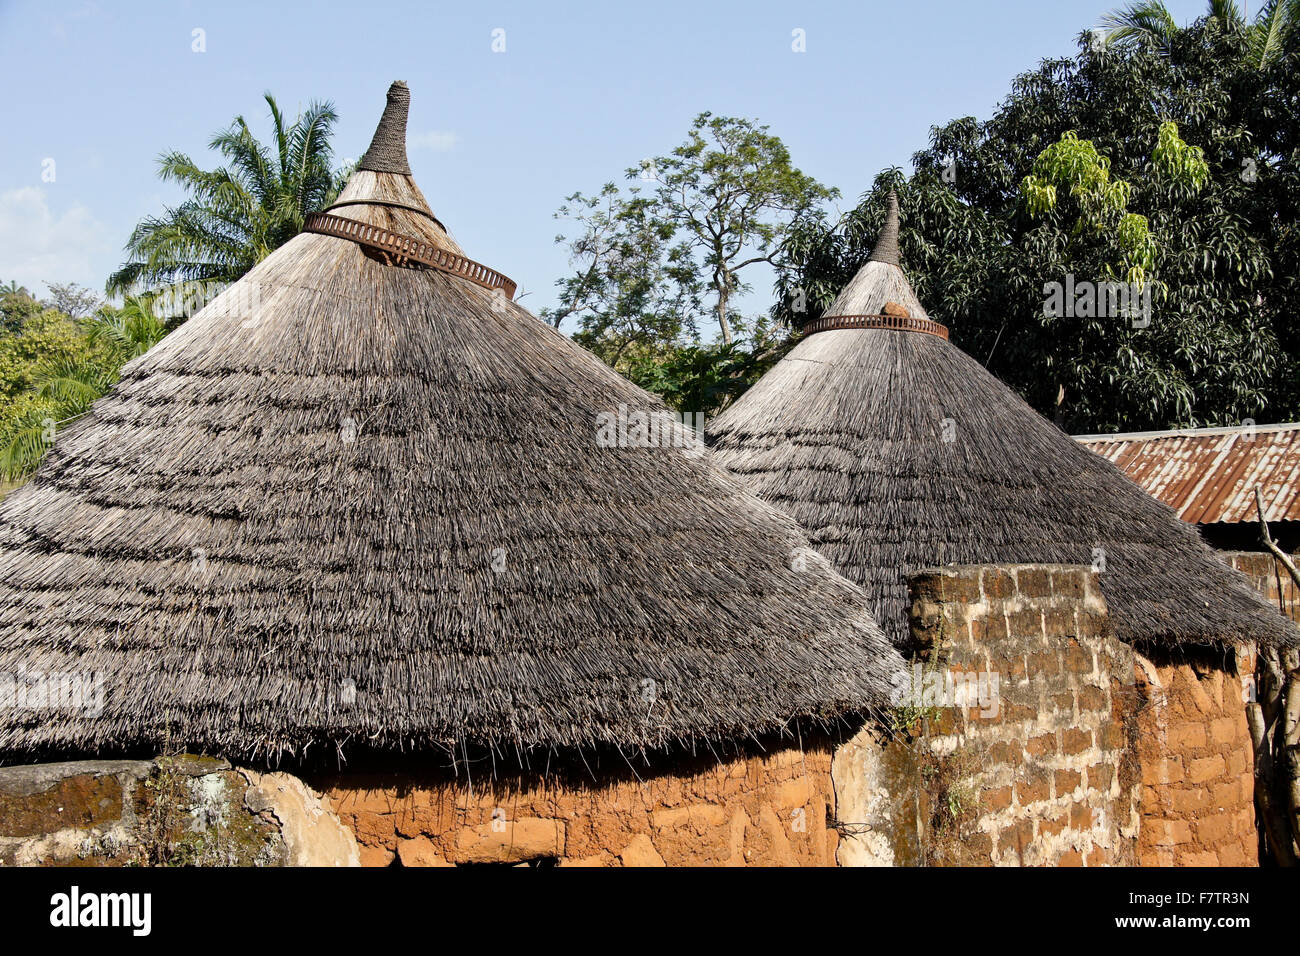 Thatched roofs on Kabye tribal huts in Togo Stock Photo